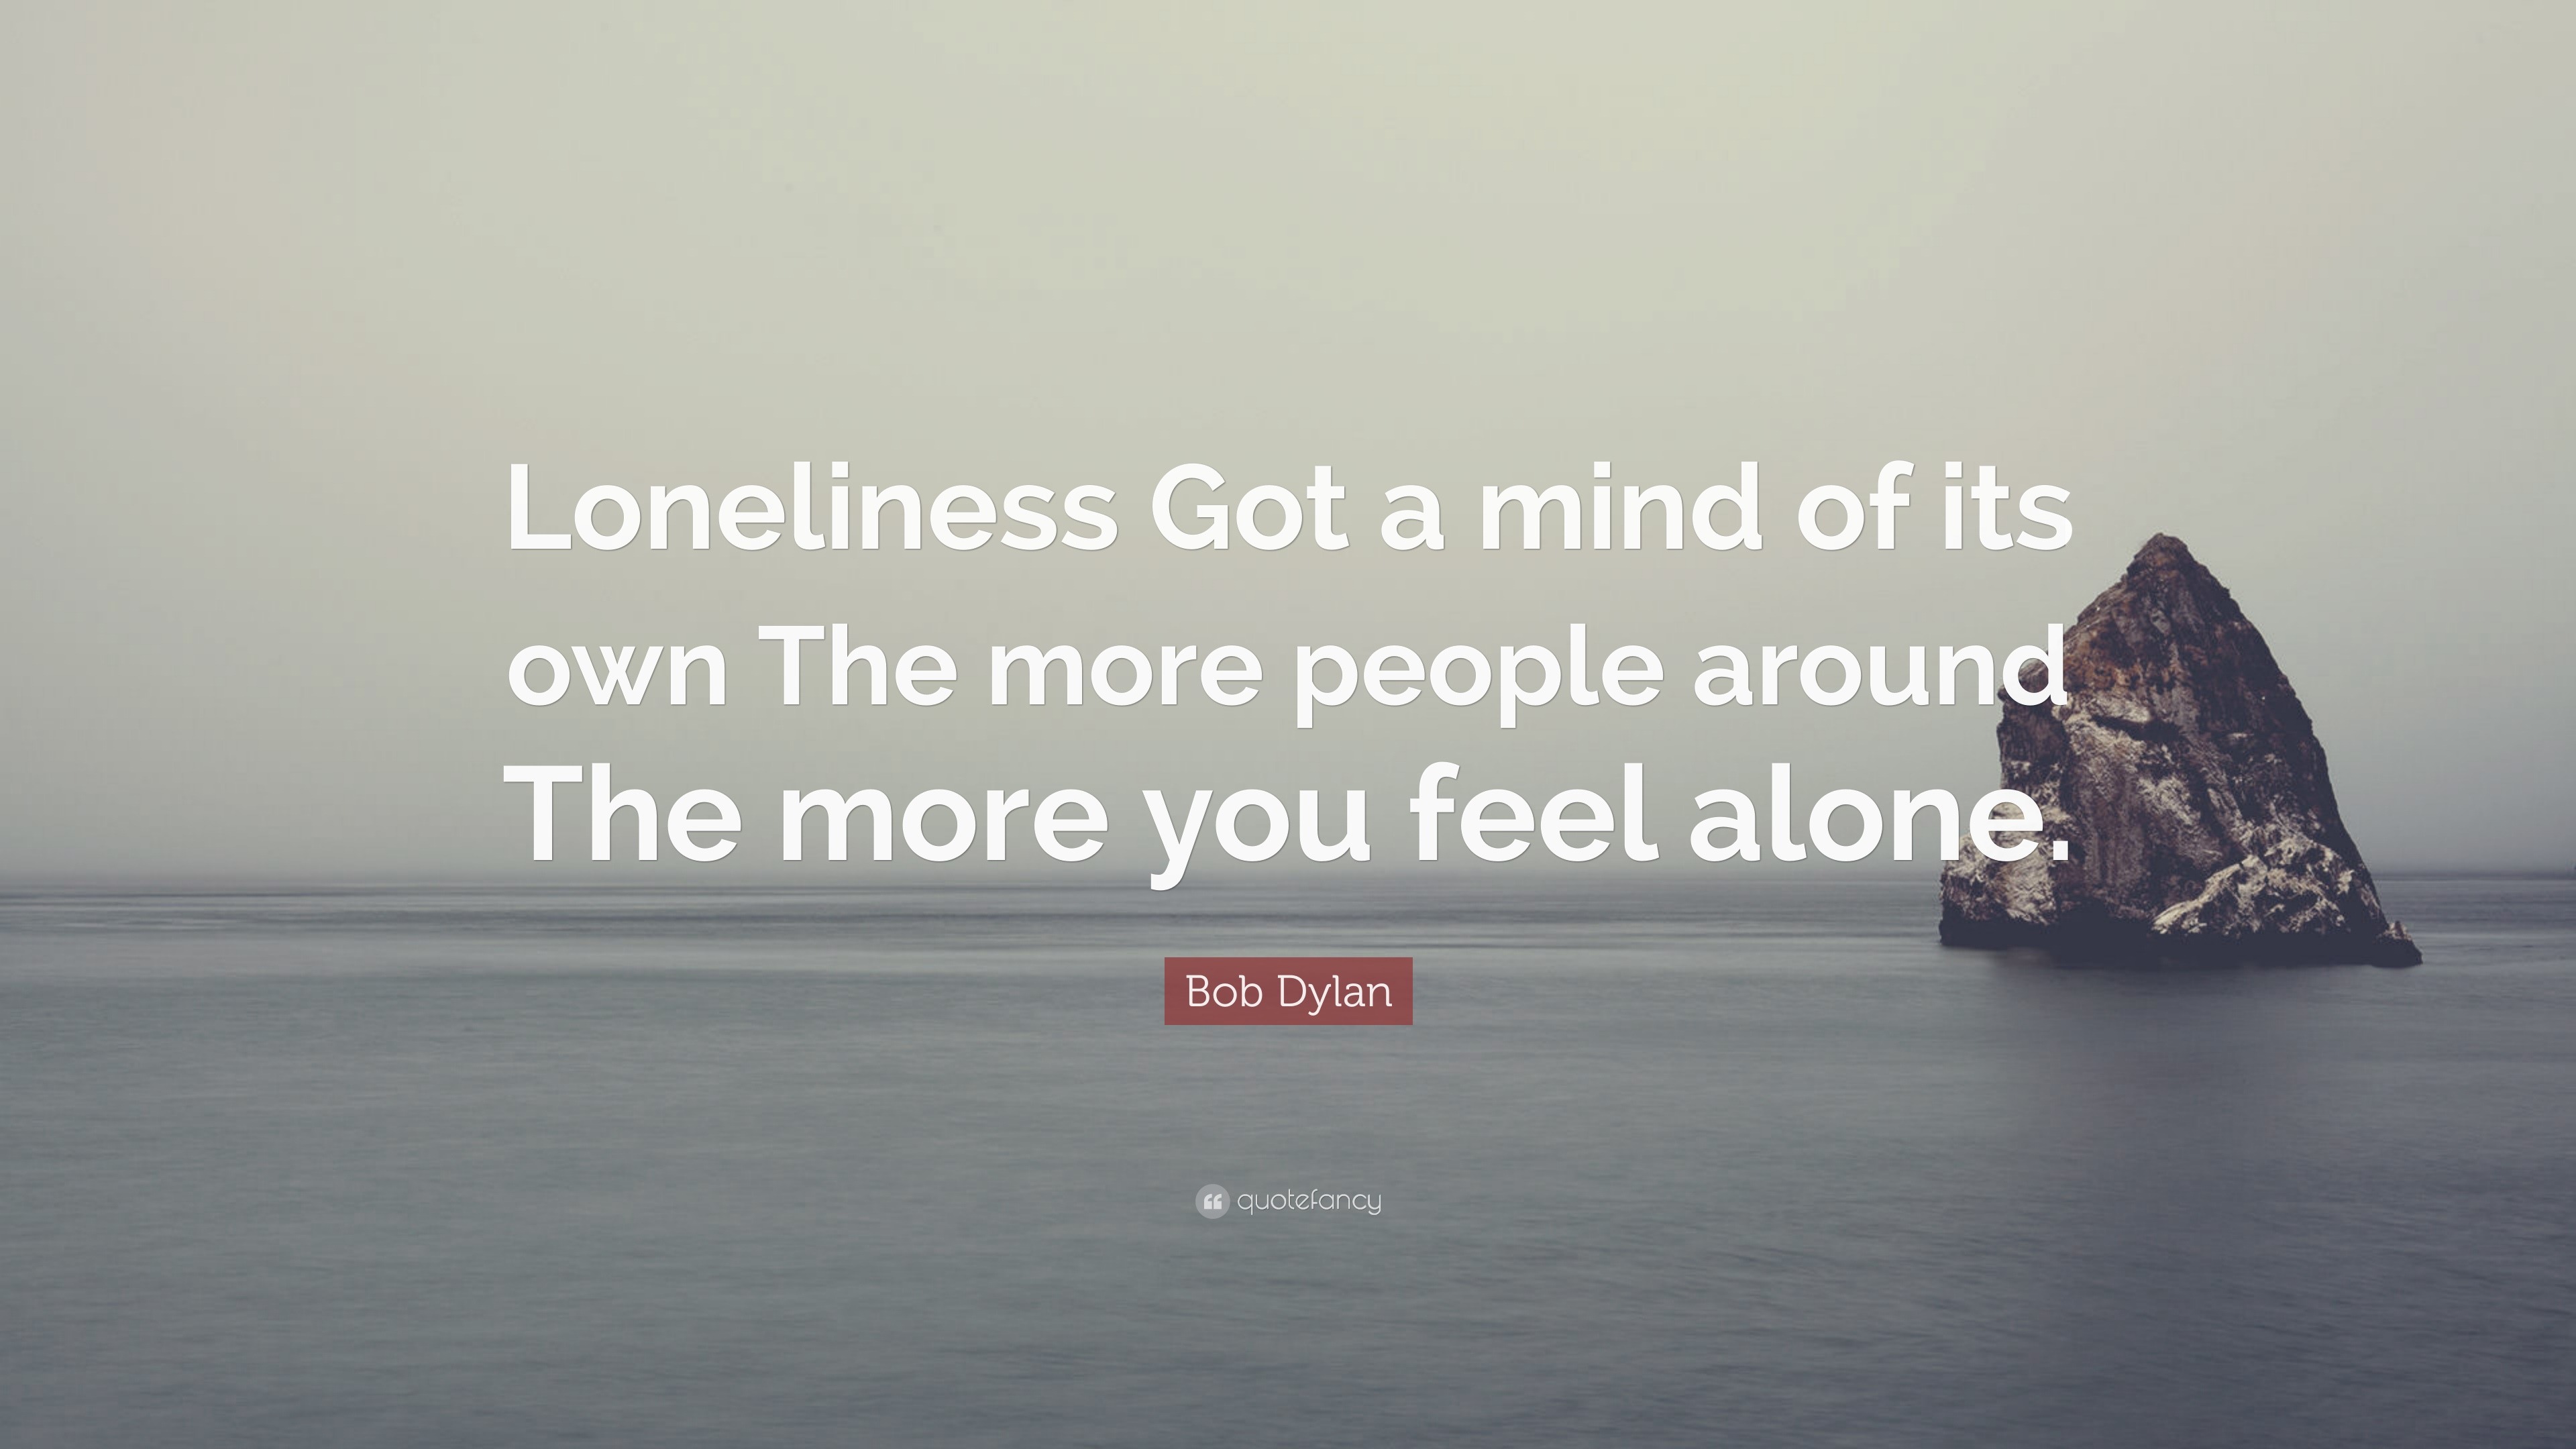 Bob Dylan Quote: “Loneliness Got a mind of its own The more people ...